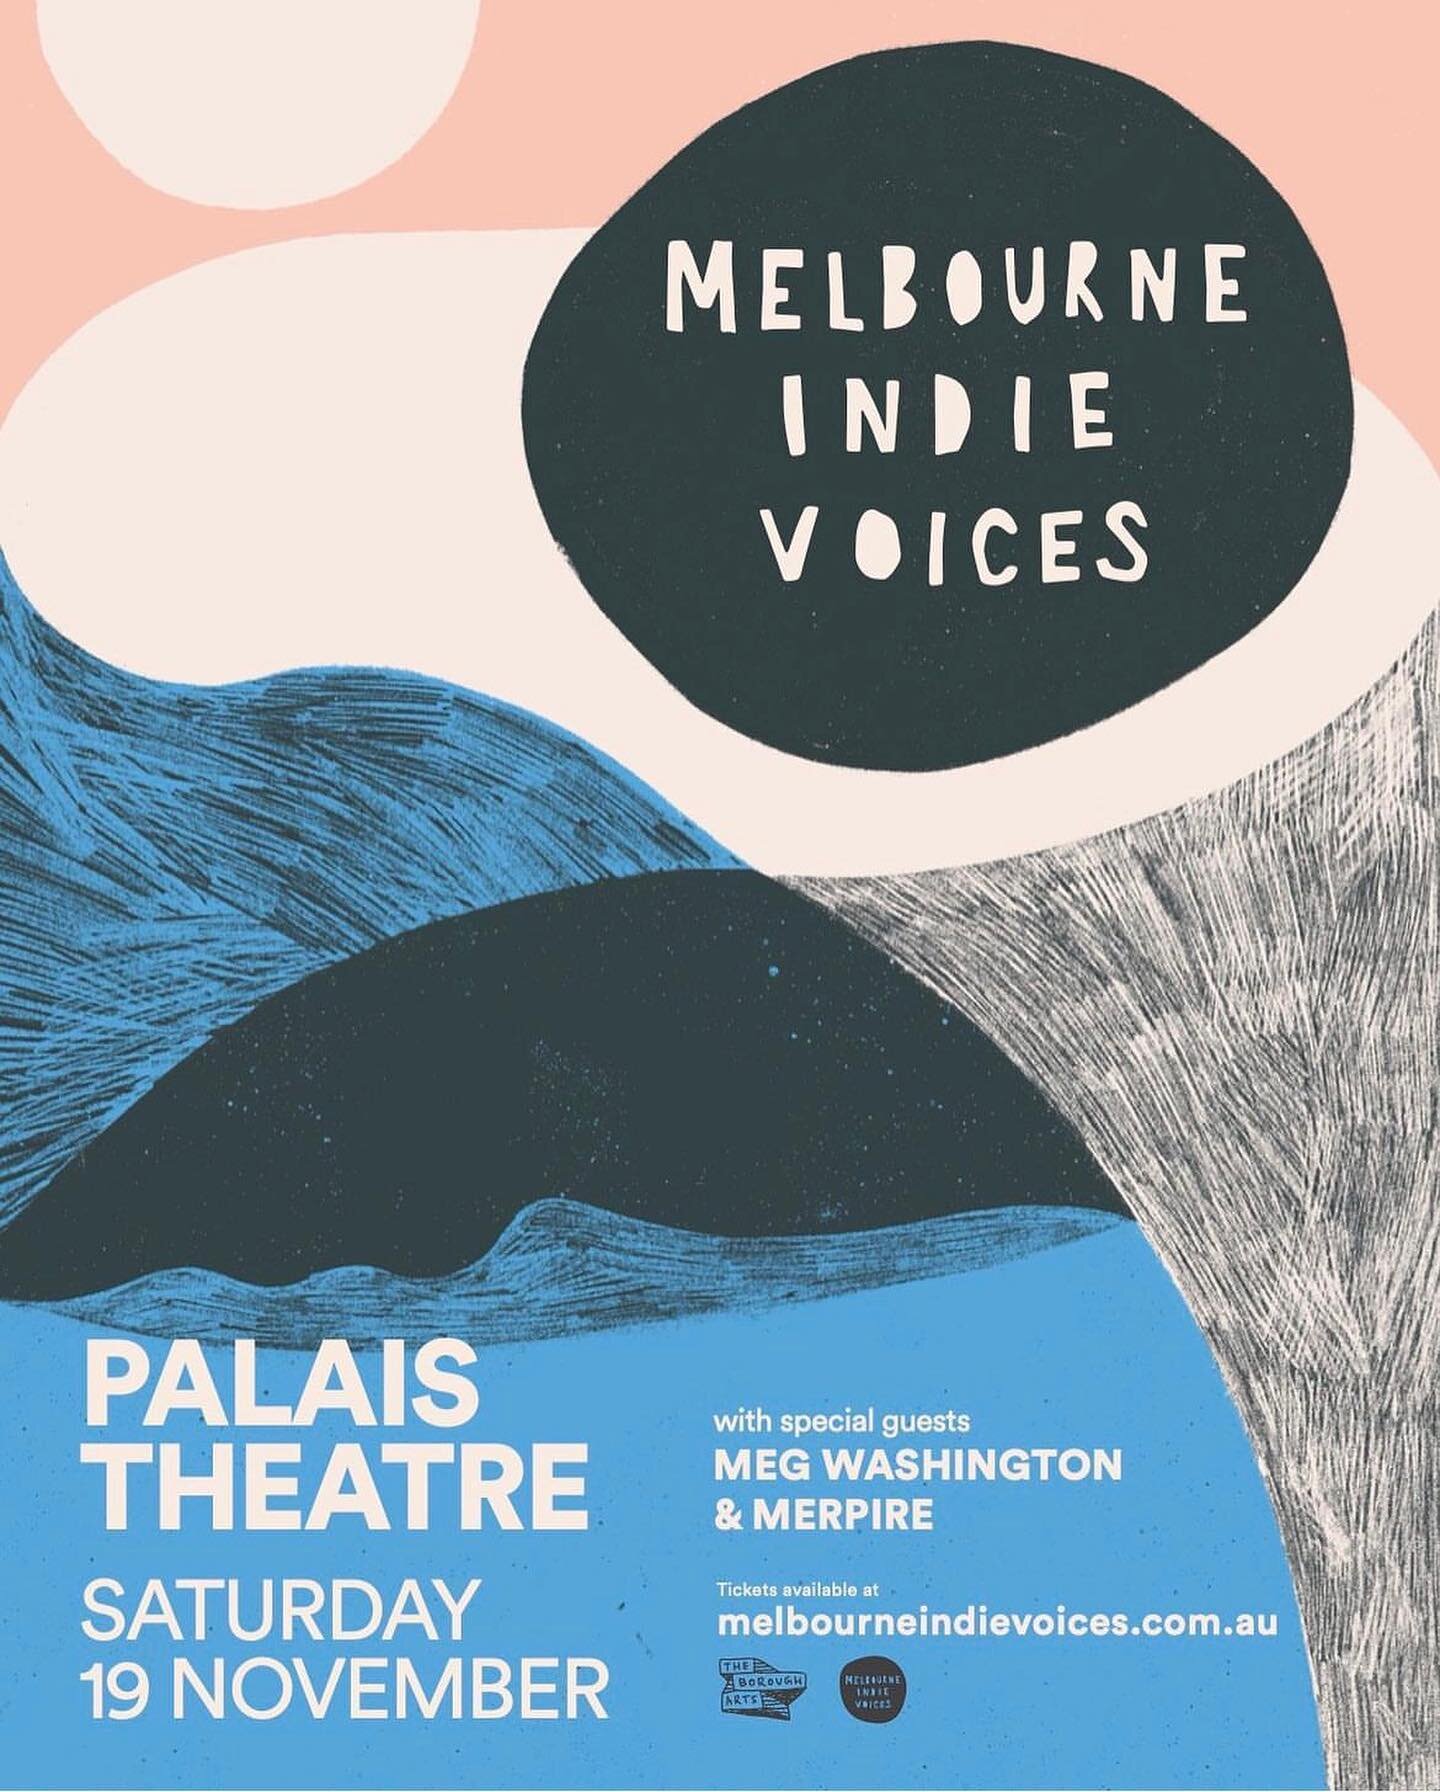 Proudly supporting our members passions! ✨ Get along to watch the @melbourneindievoices with special guests @washingtongram &amp; @merpiremusic belt out some ballots Saturday Nov 19 @palaistheatre ✨
.
.
.
.
#coworking #coworkingcommunity #supportings